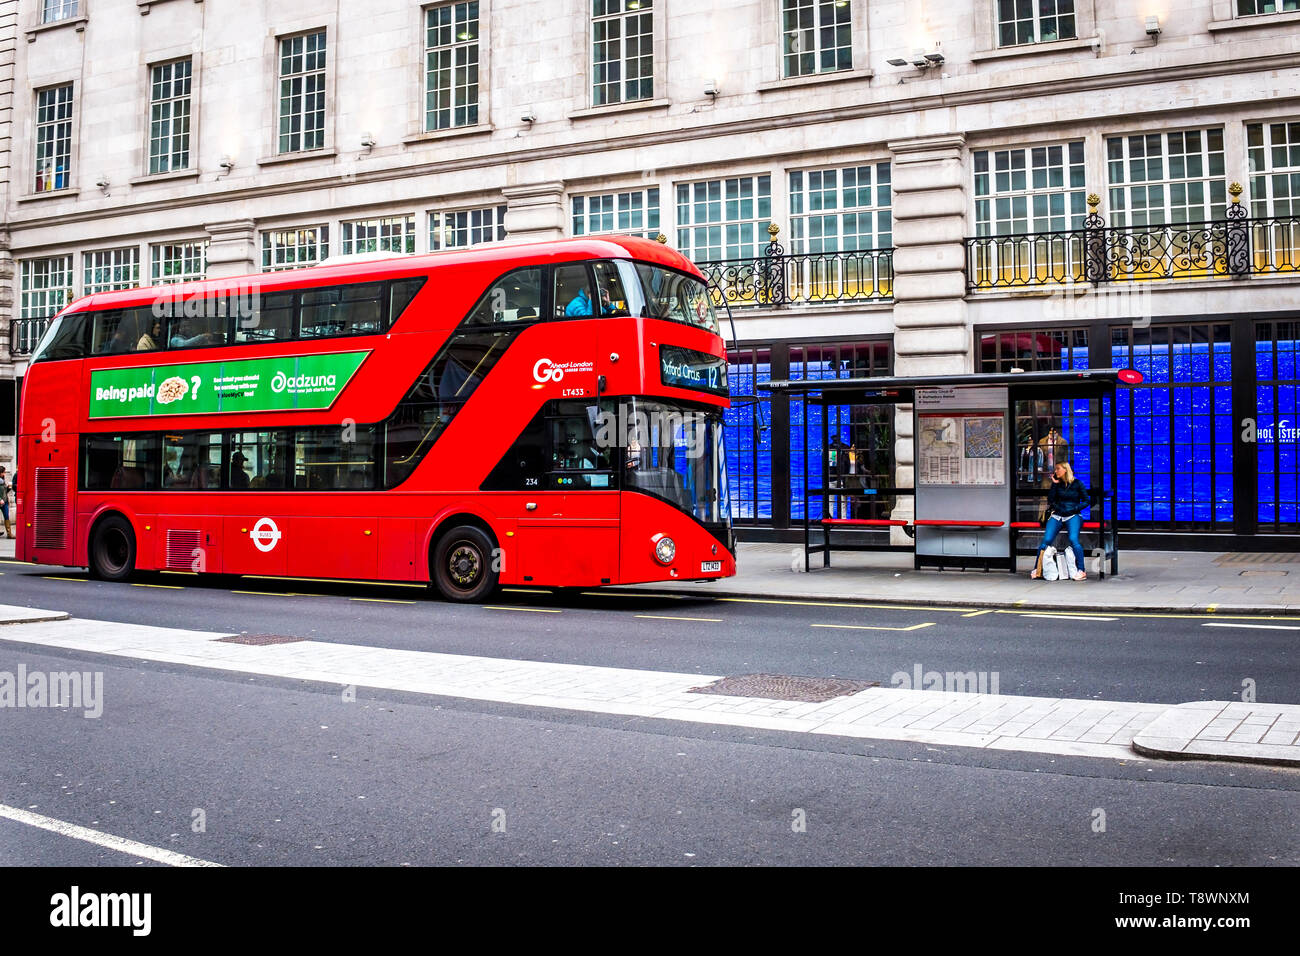 red double decker bus in Oxford Street, London Stock Photo